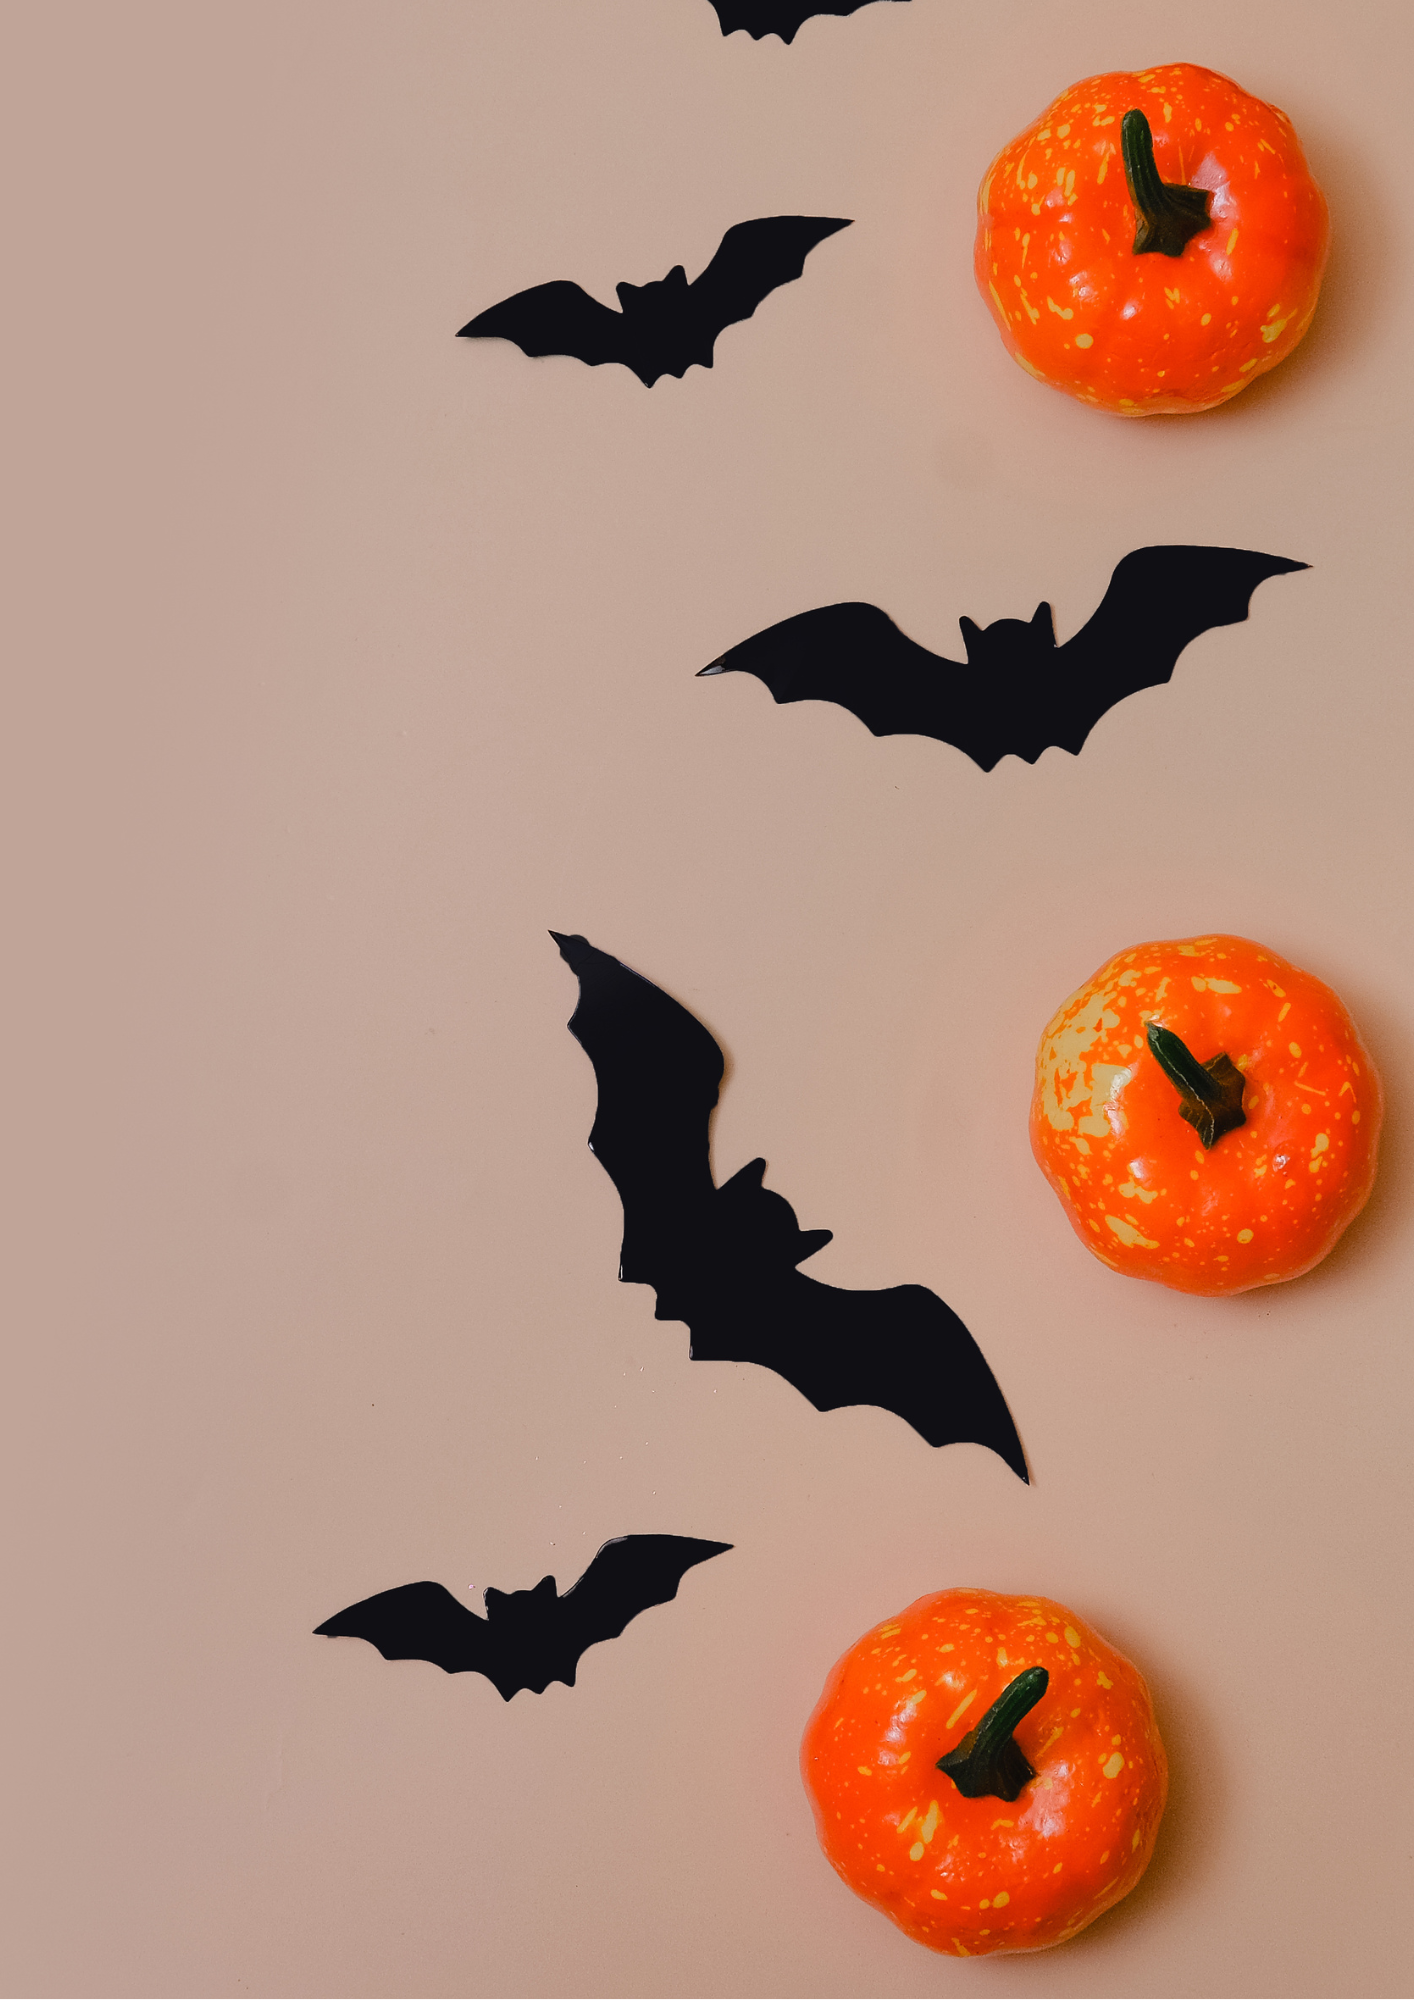 DIY Halloween Craft Ideas: Spooktacular Decorations and Crafts for a Hauntingly Good Time"